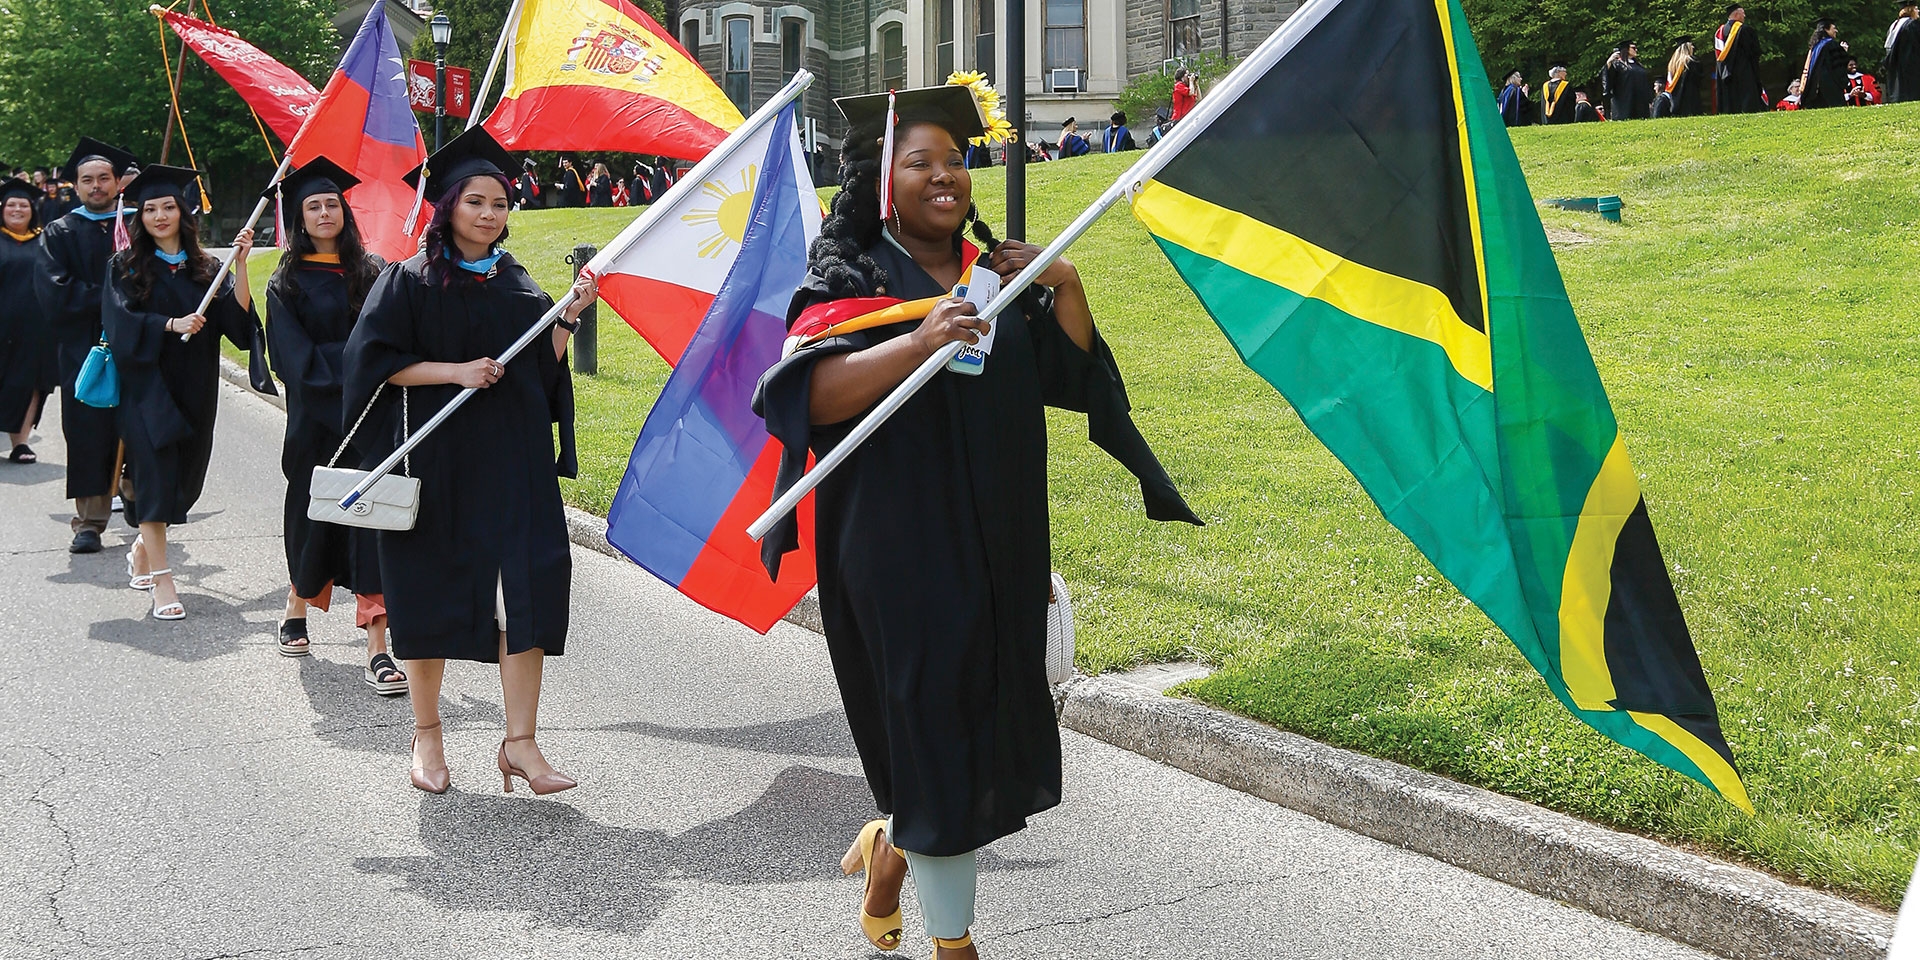 students carrying flags at commencement ceremony